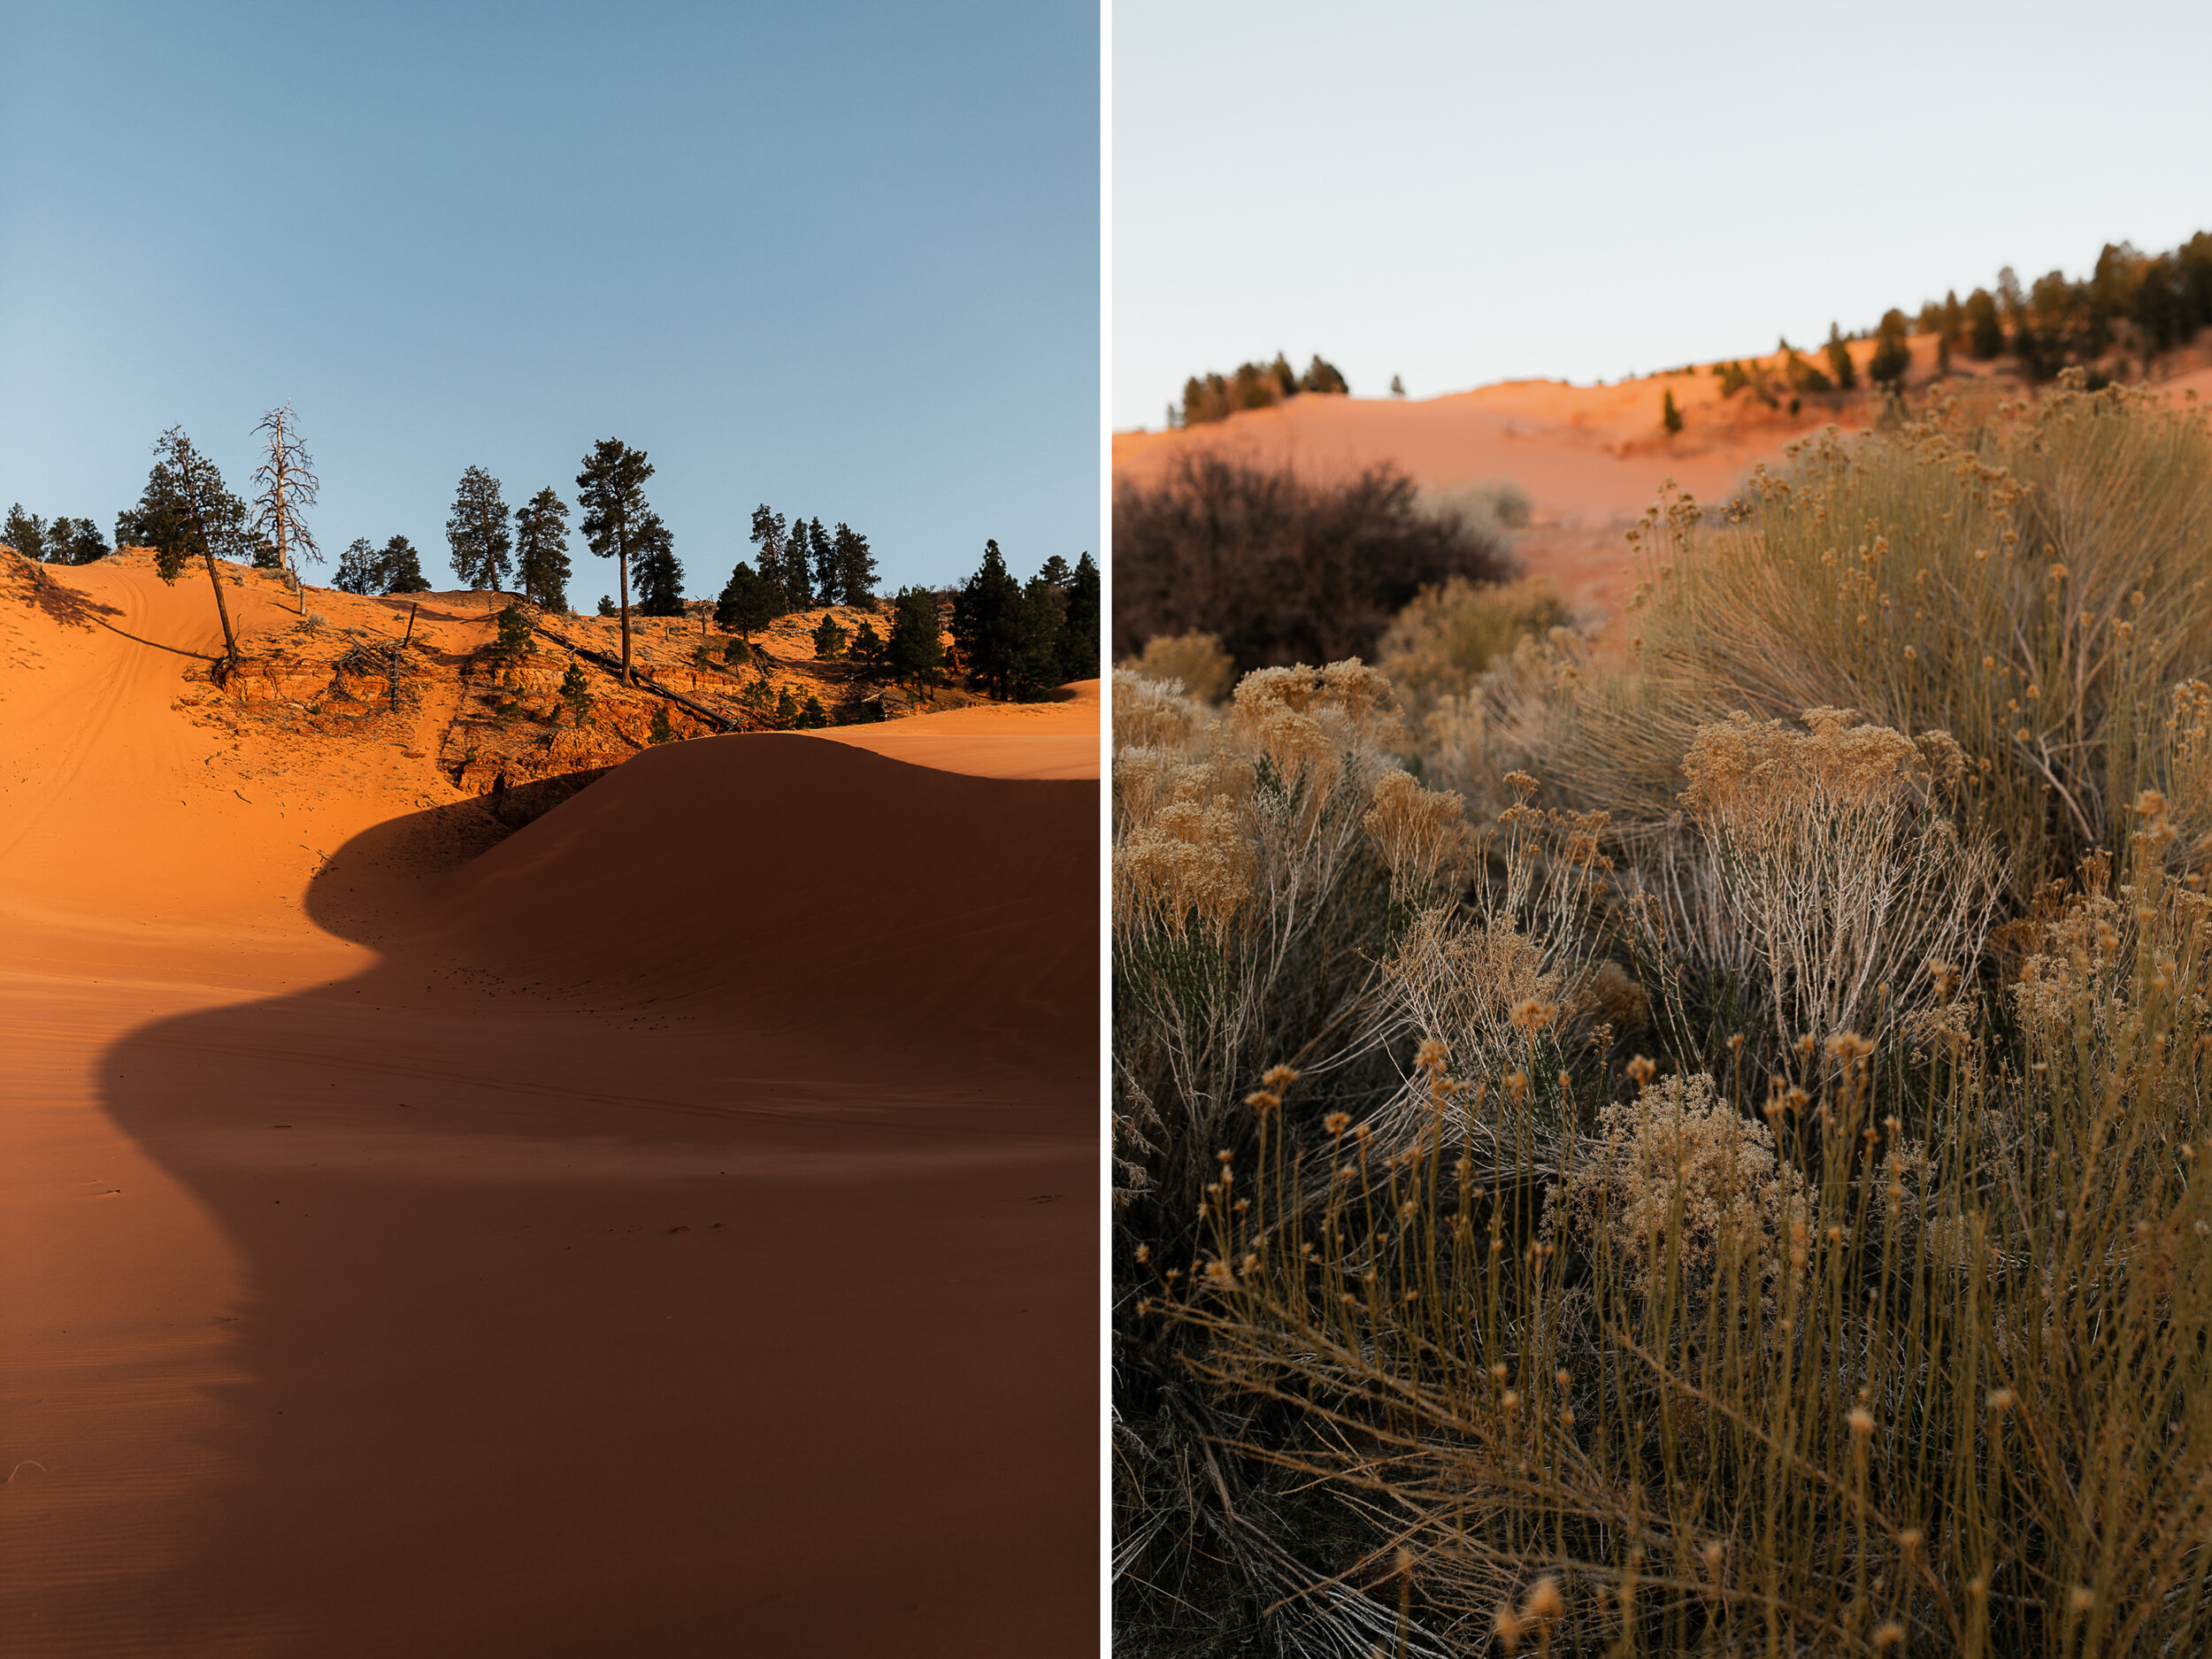 Intimate Elopement | Red Sand Dunes and Desert Landscape in Utah | The Hearnes Photography